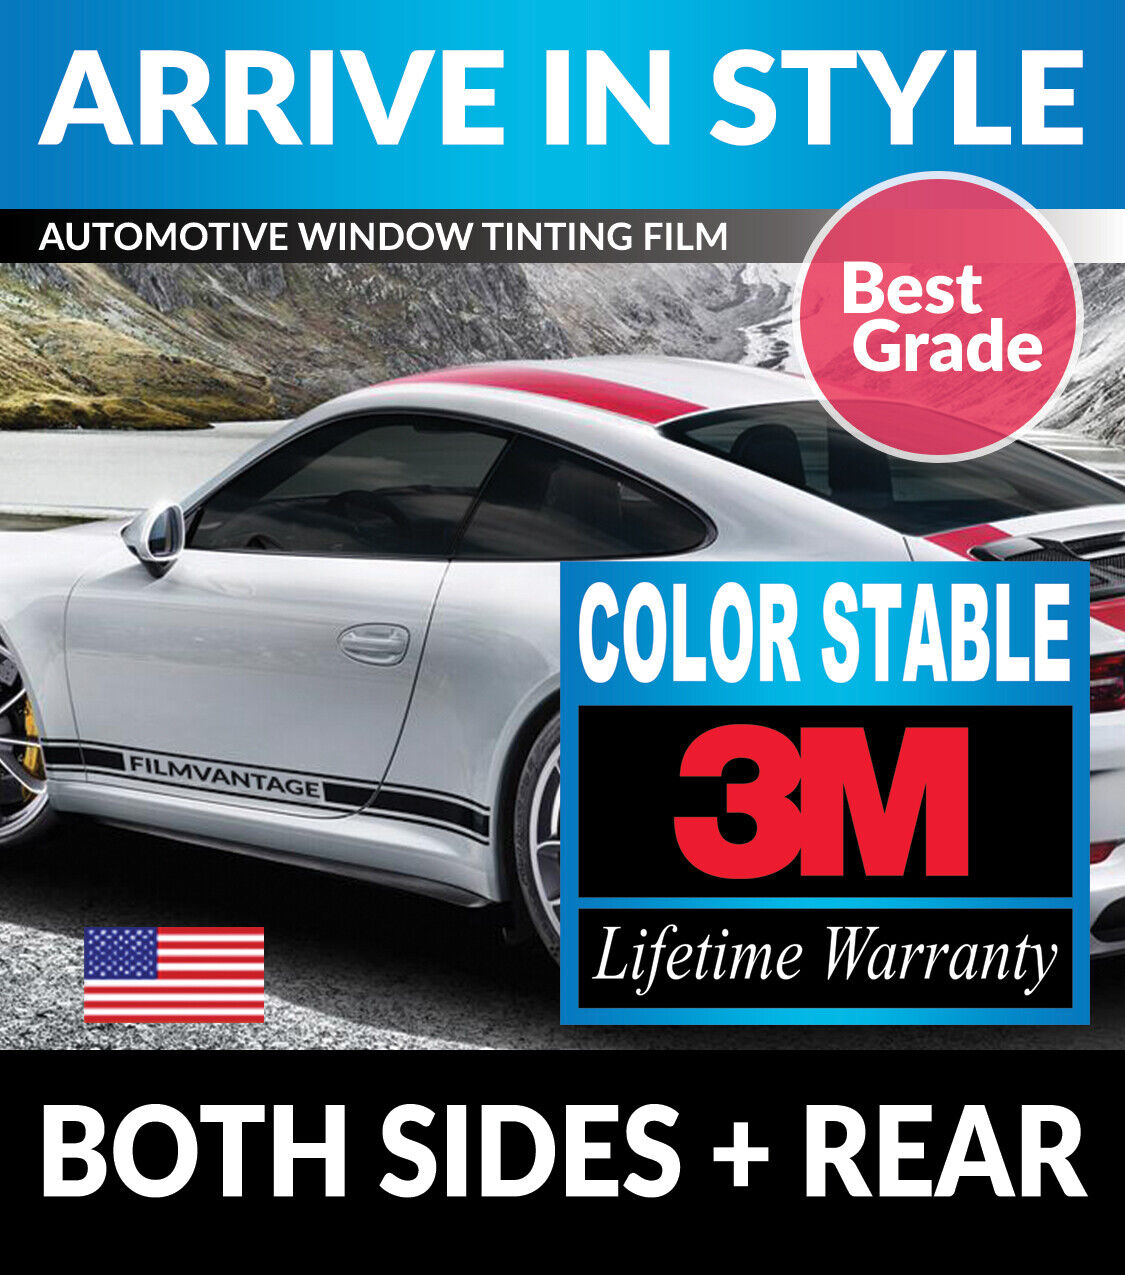 PRECUT WINDOW TINT W/ 3M COLOR STABLE FOR BMW Z4-M COUPE 06-08